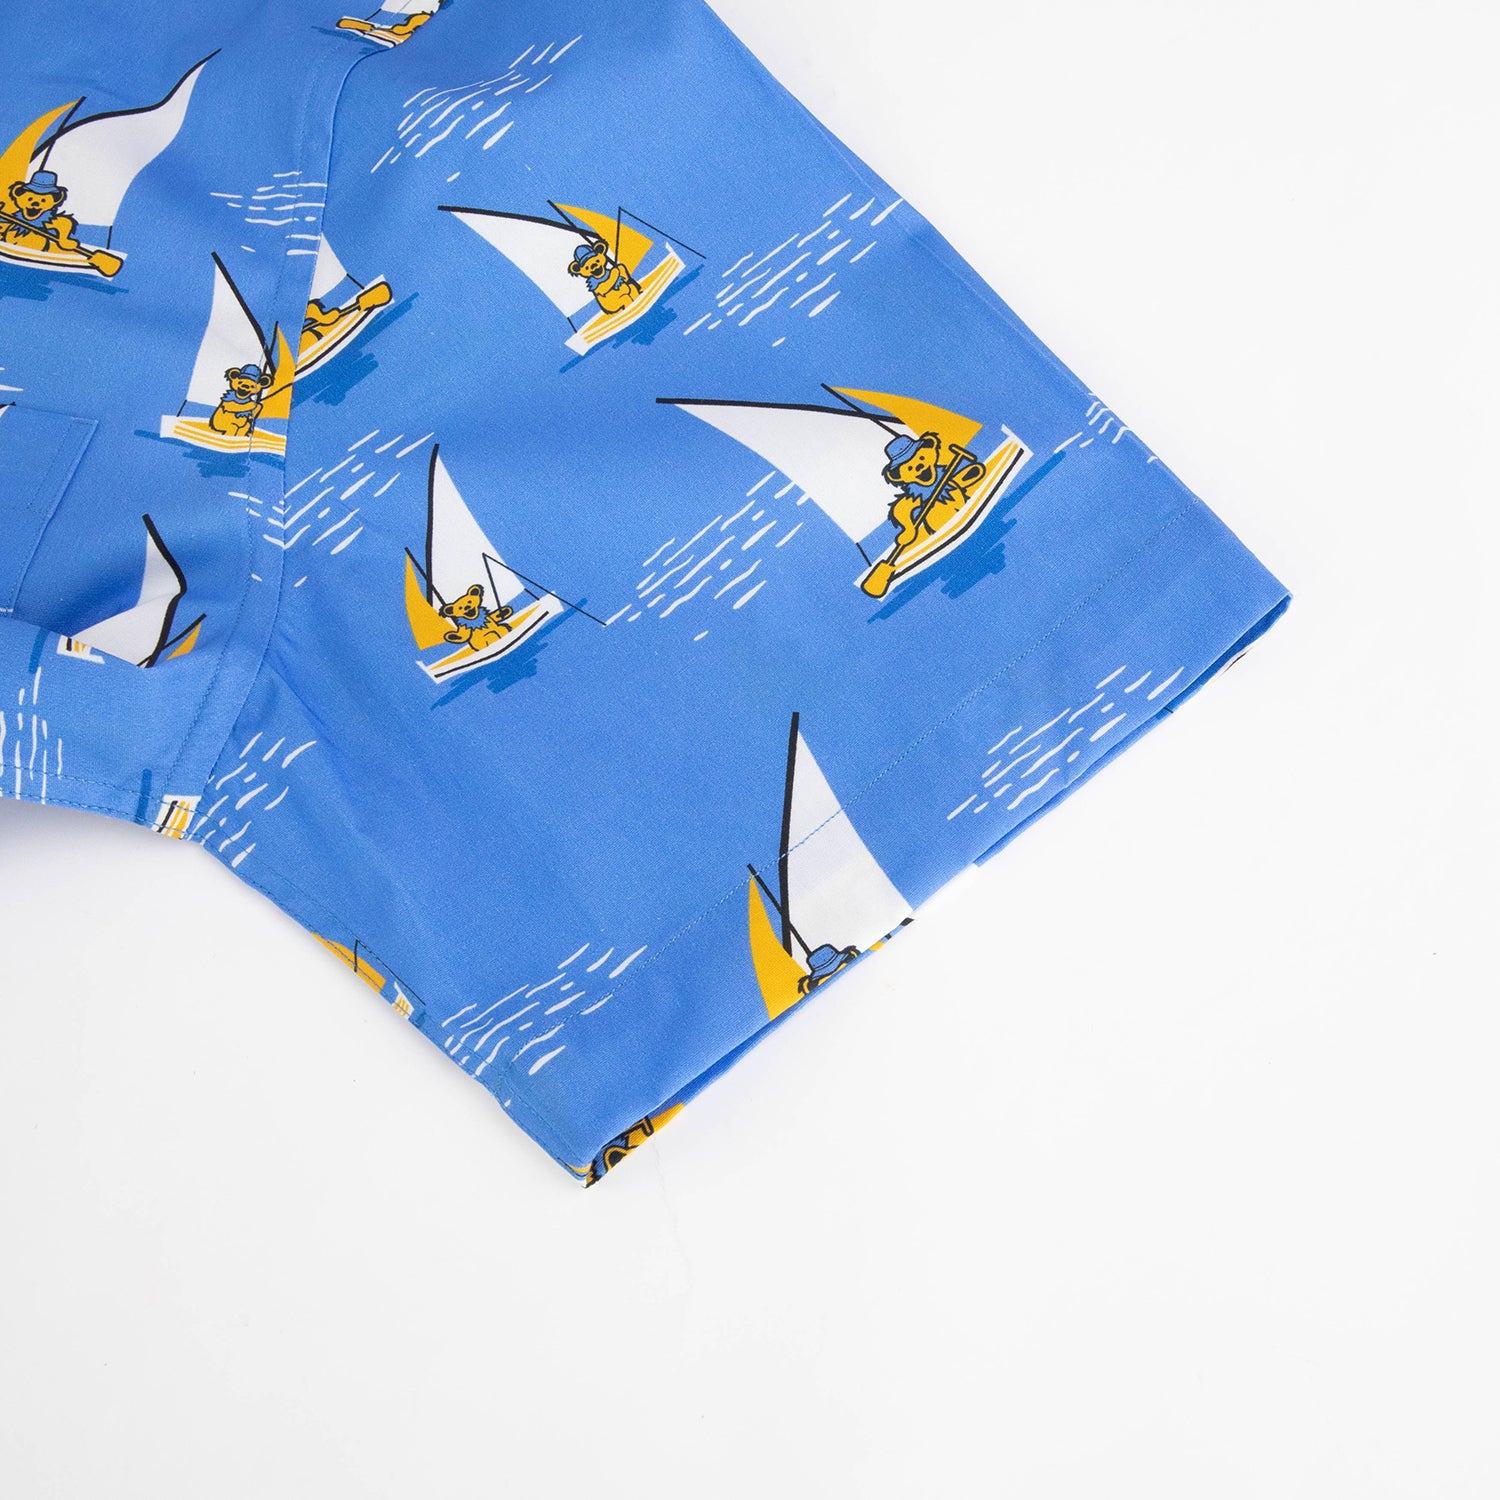 Grateful Dead | Classic Button Down | Bear in Sail Boat All Over Blue - Section 119